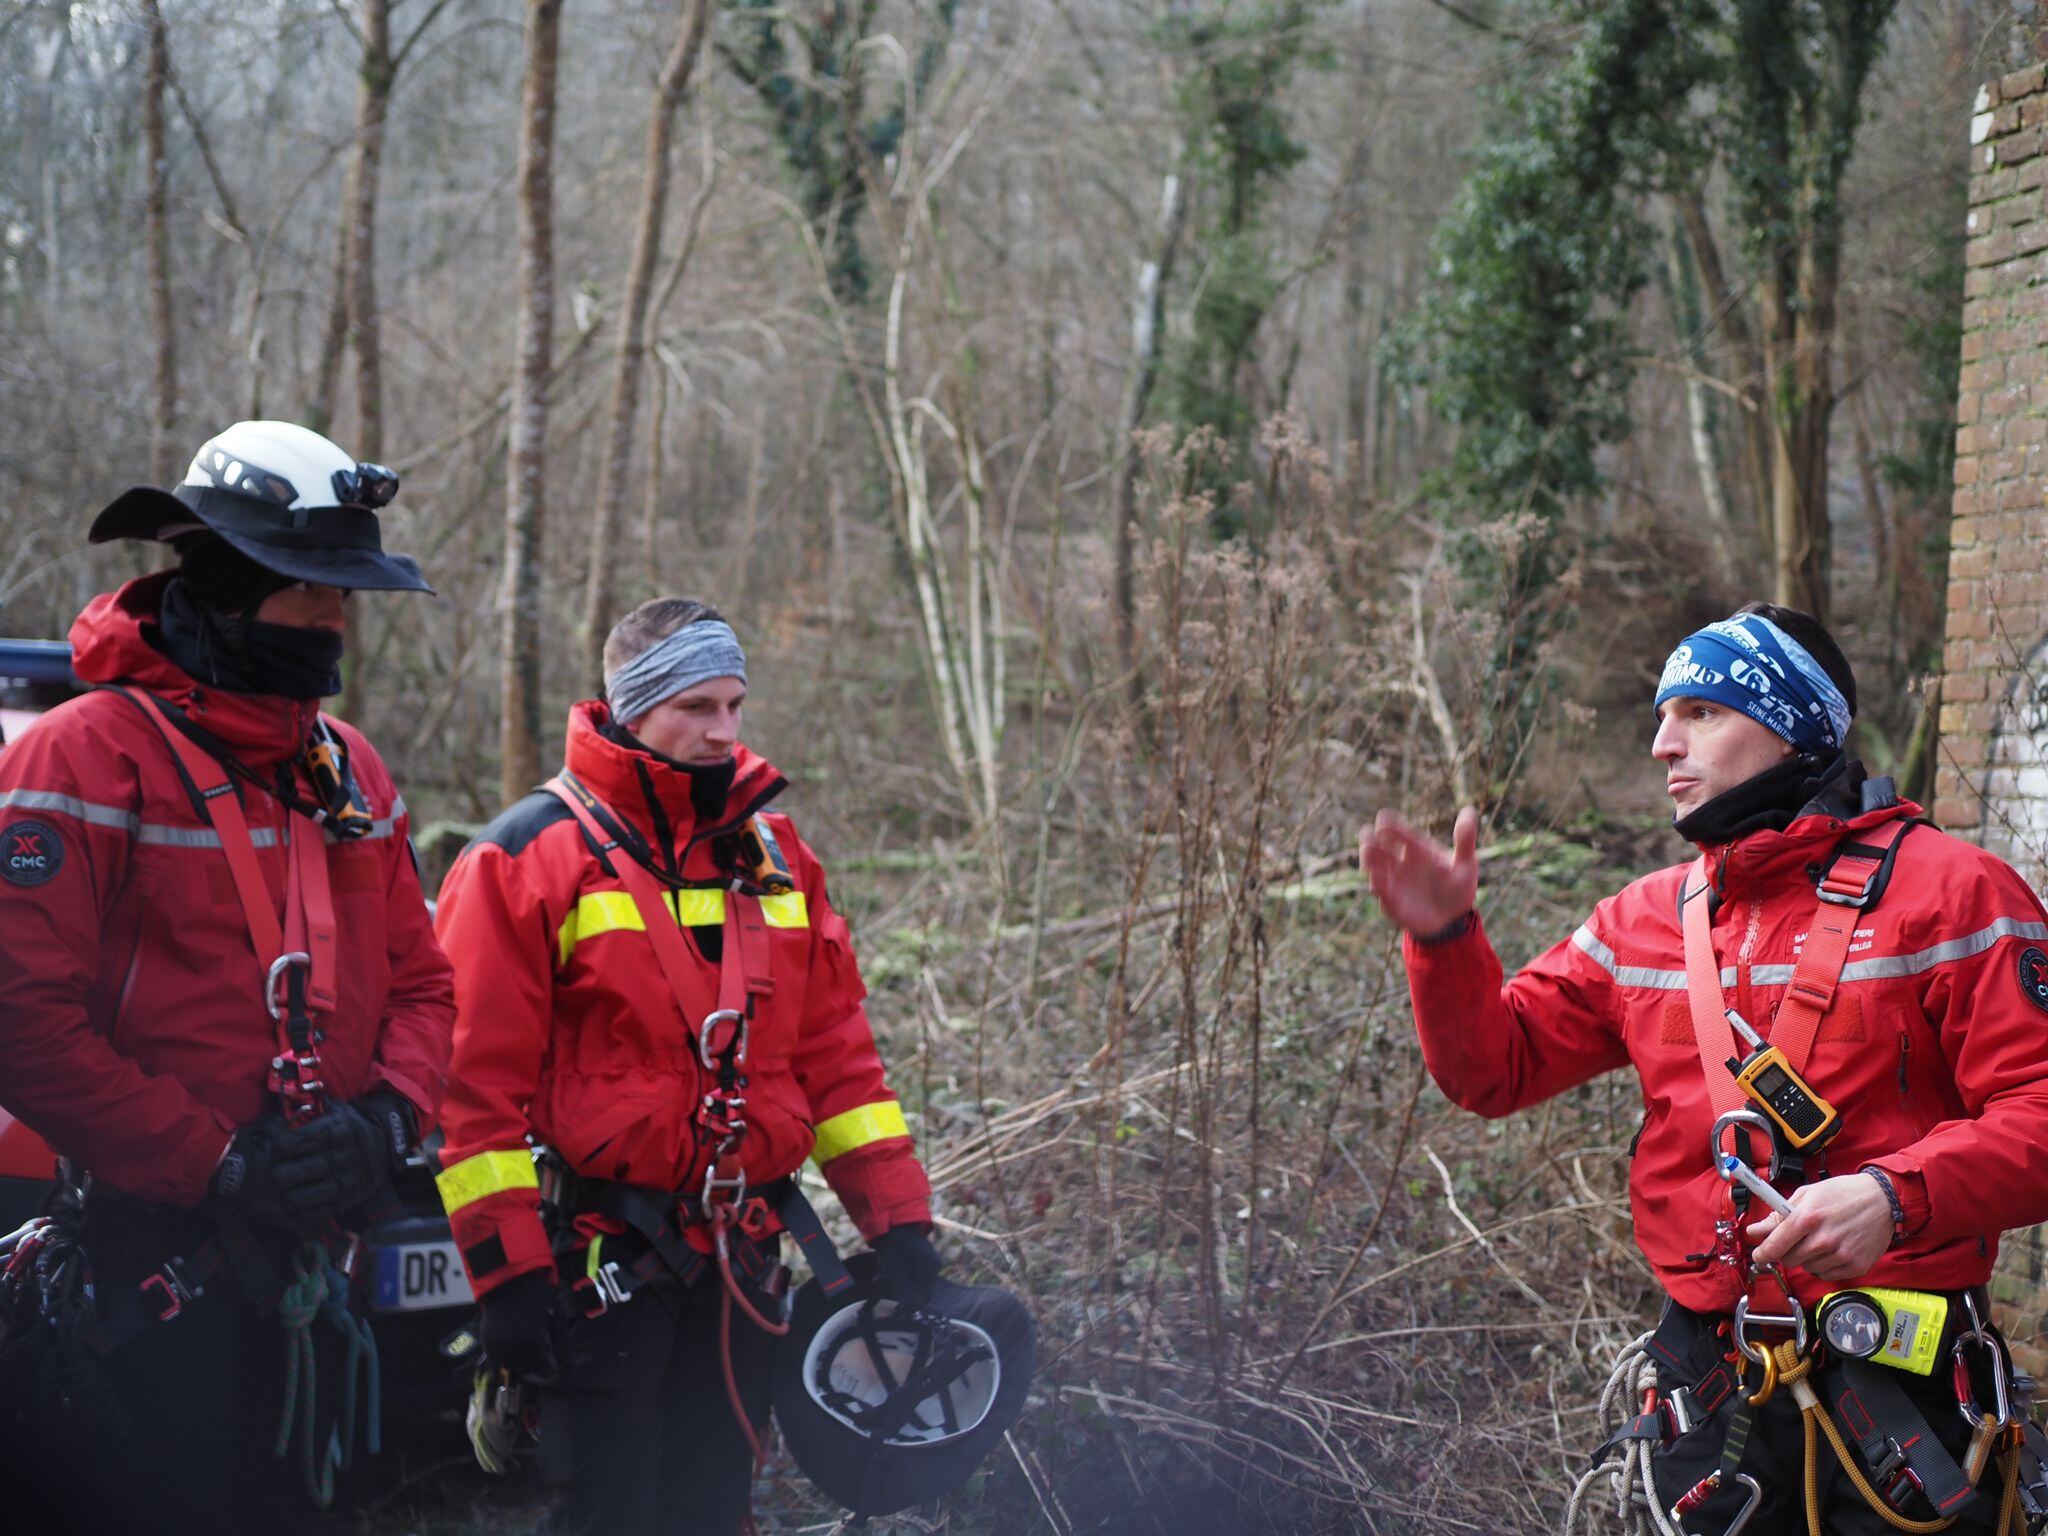 An interview with Rope Rescue Team 76 about Grimpday and Peli